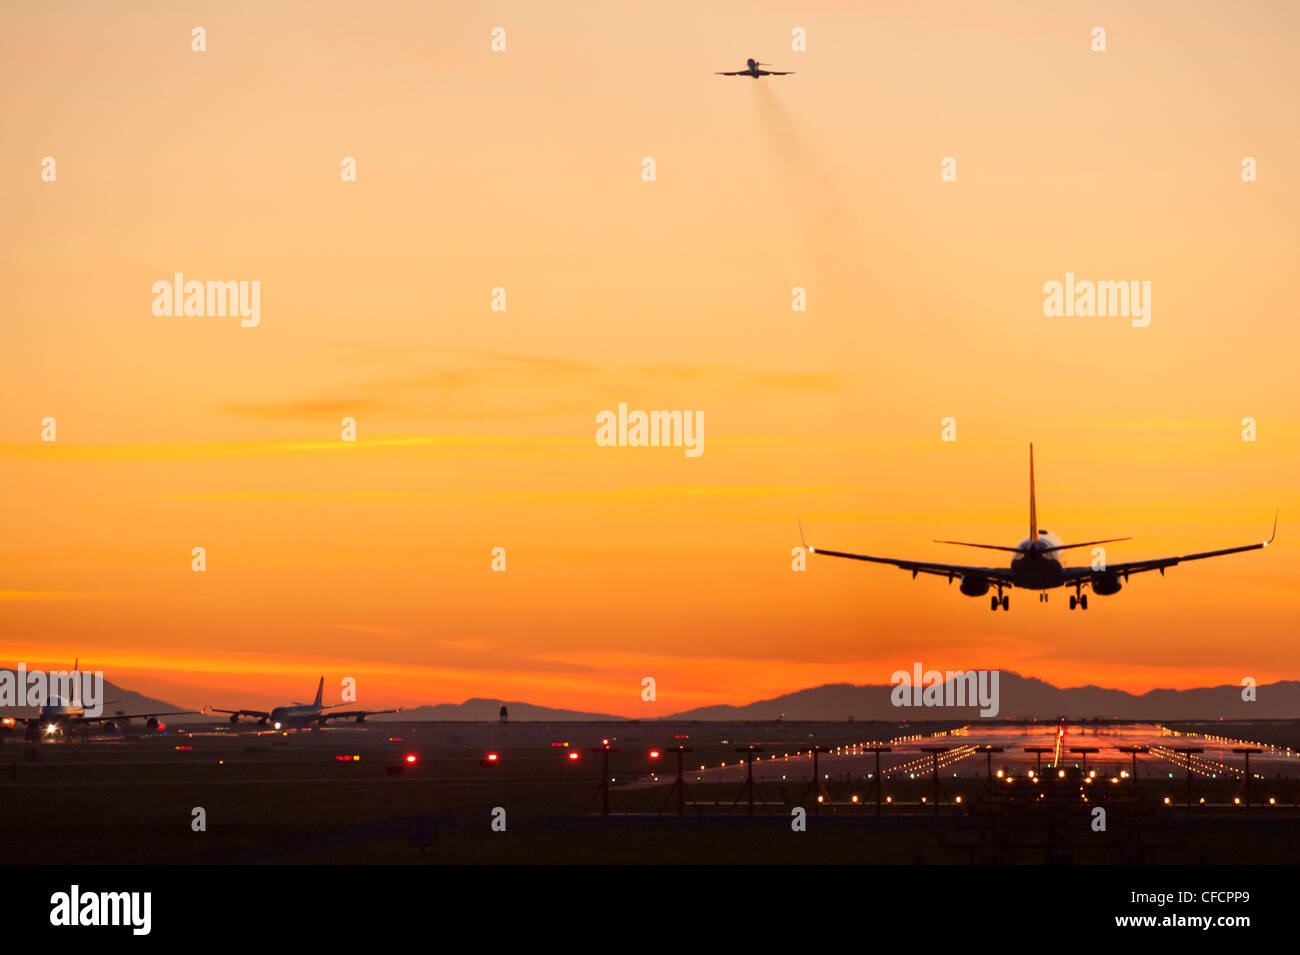 Inbound, outbound and taxiing aircraft. Stock Photo